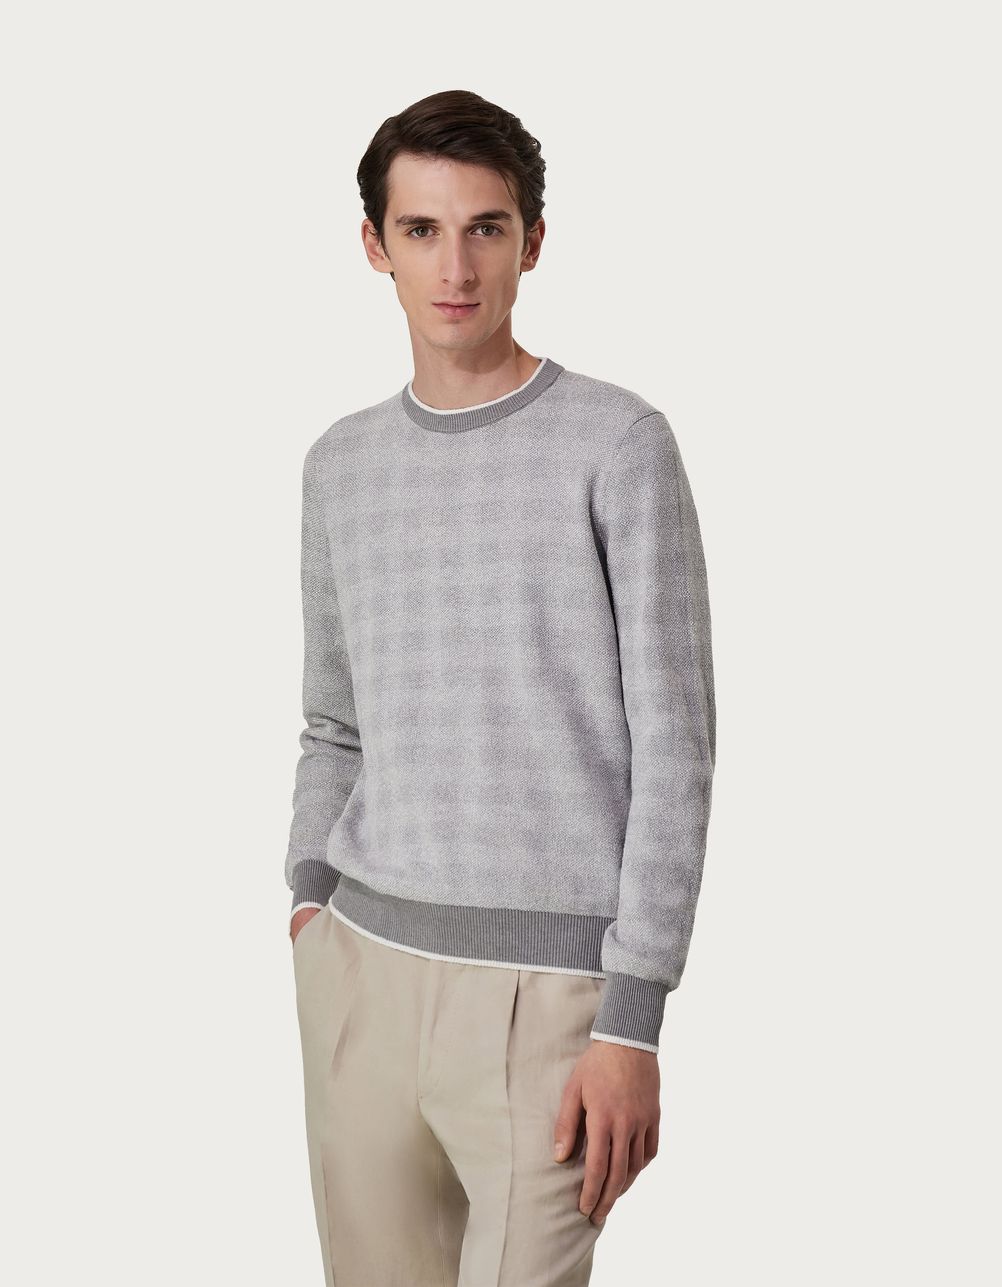 Grey and ivory crew-neck in jacquard cotton